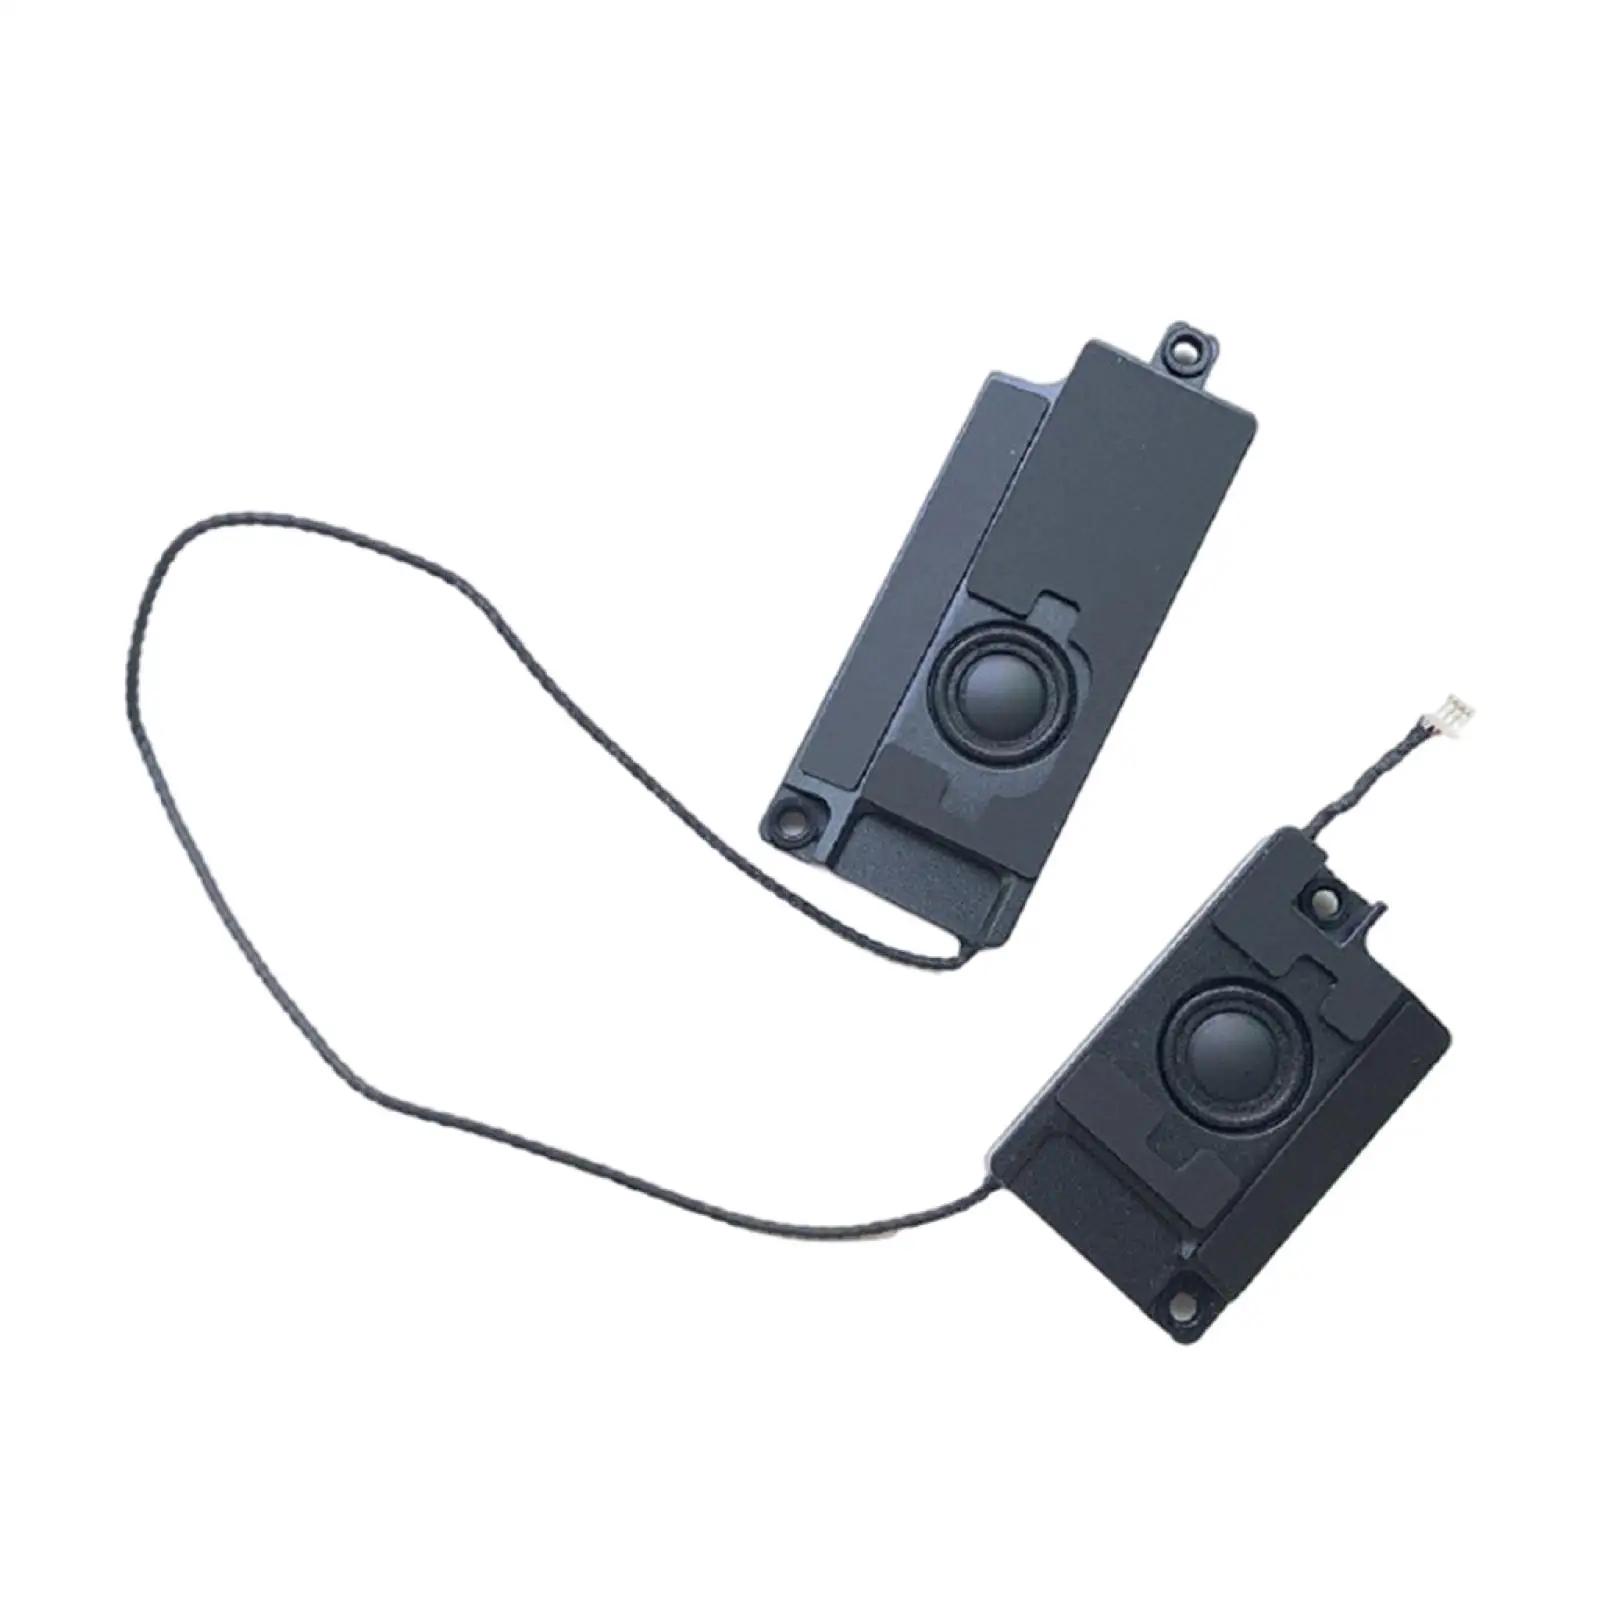 2 Pieces Built-In Speakers 02HL004 L and R Replace Part for Lenovo x390 x395 ThinkPad Laptop Notebook